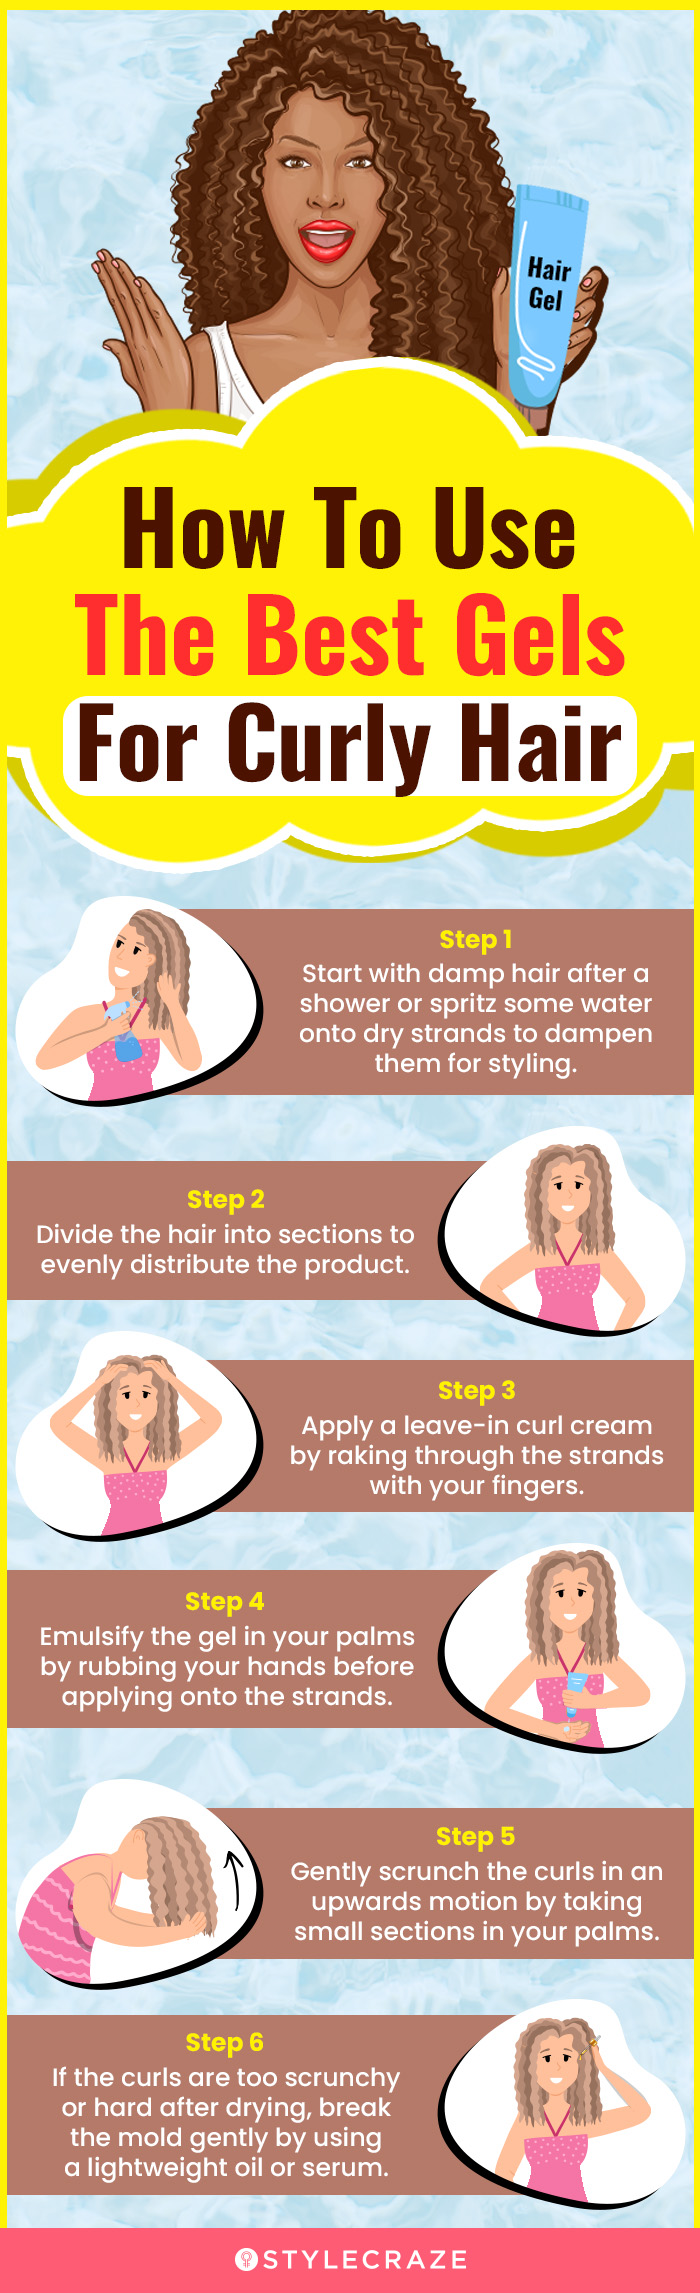 How To Use The Best Gels For Curly Hair (infographic)